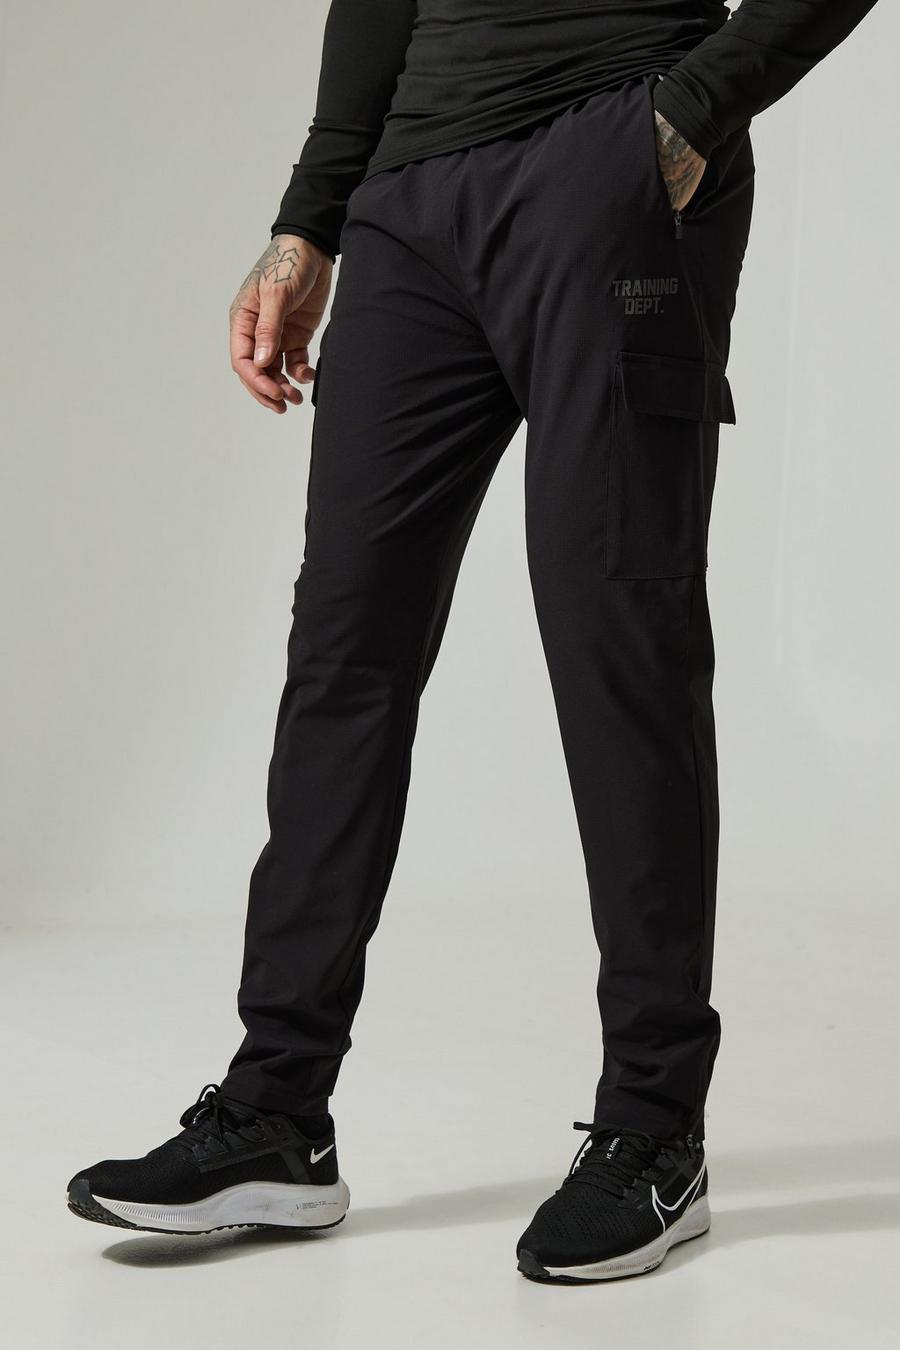 Black Tall Active Training Dept Tapered Cargo Joggers image number 1